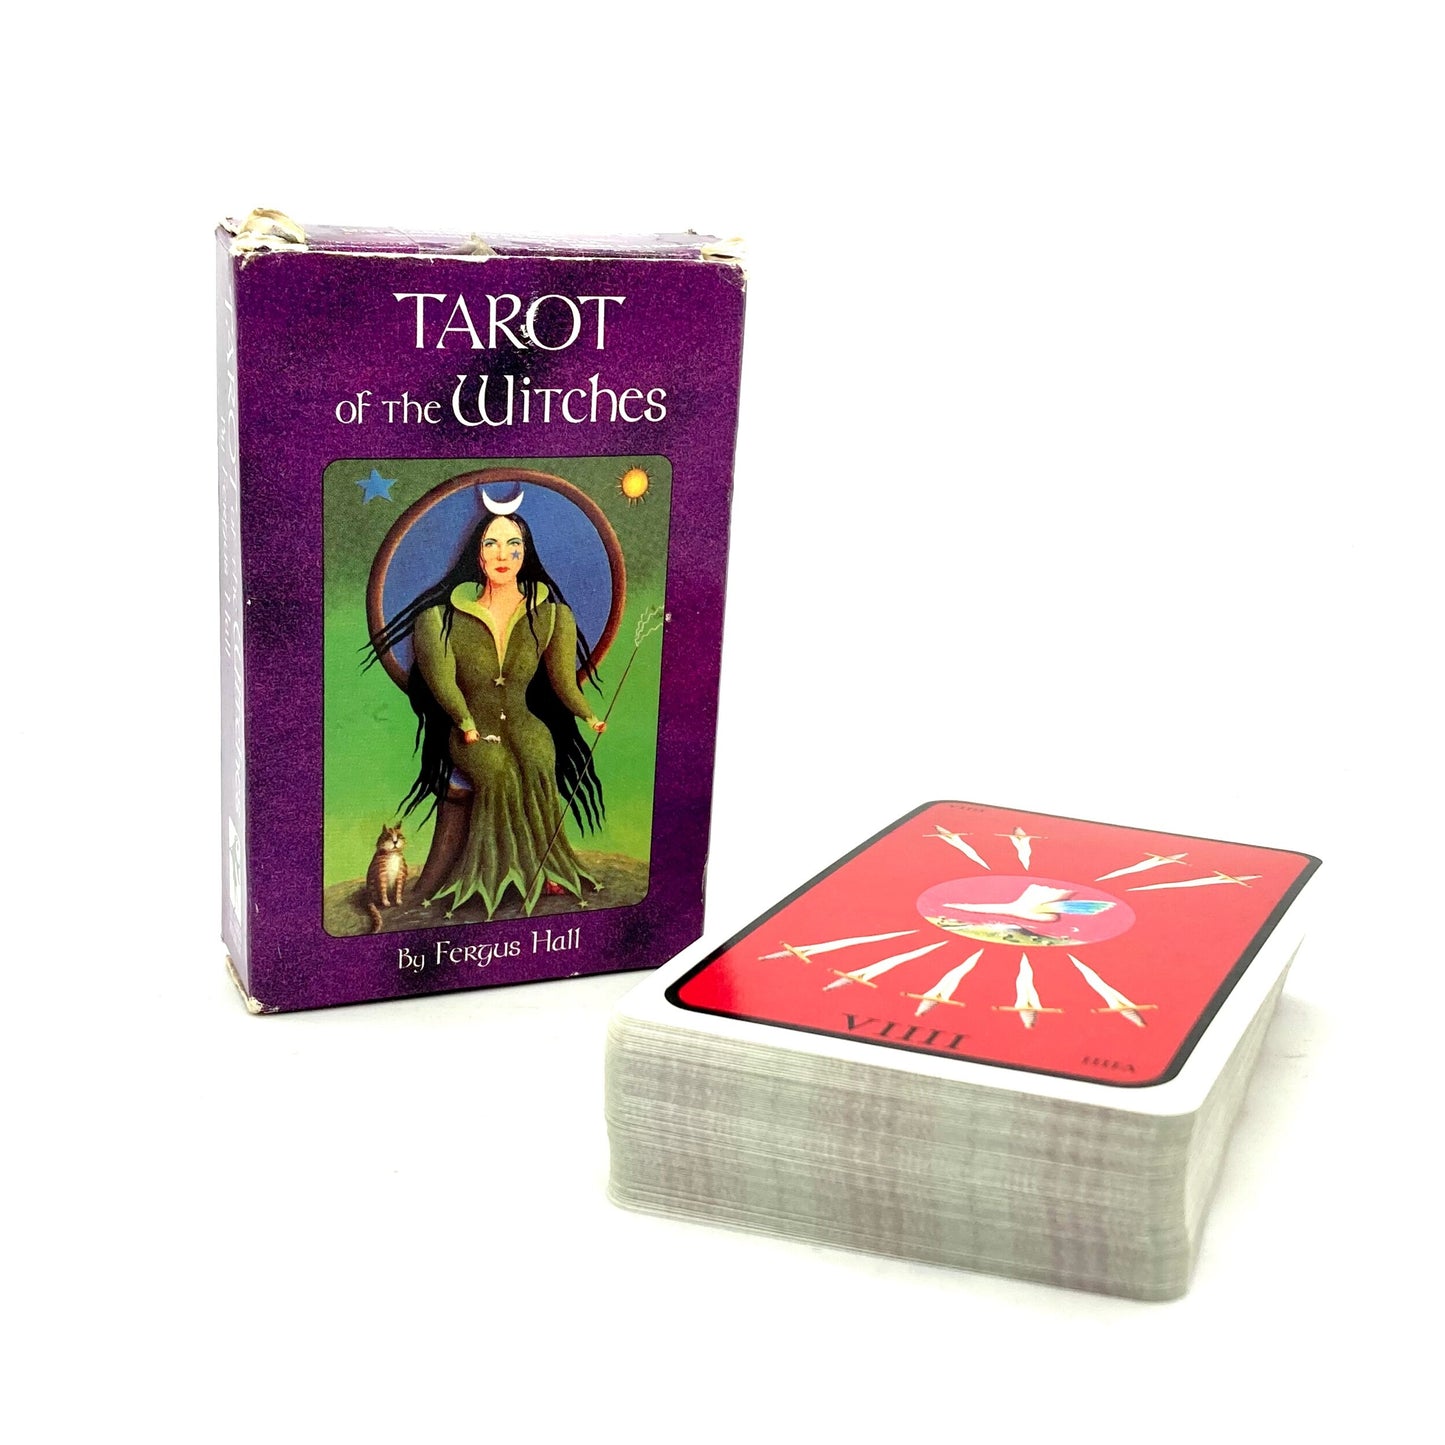 HALL ,Fergus "Tarot of the Witches" [US Games Systems, 2001] - Buzz Bookstore